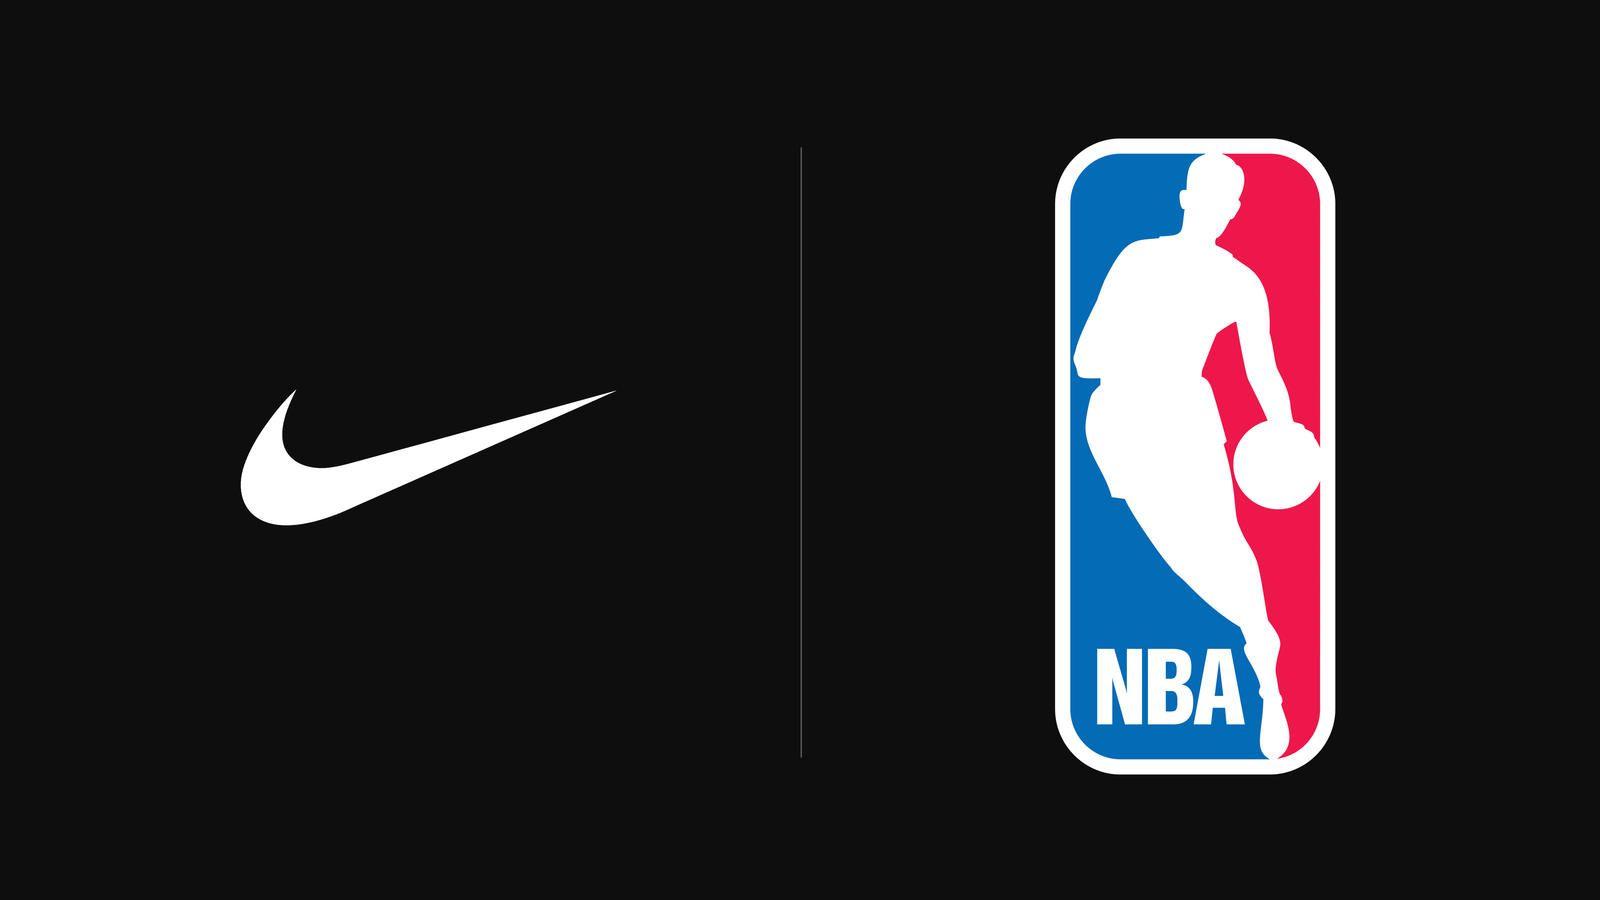 Nike News, Inc. to Become Exclusive Oncourt Uniform